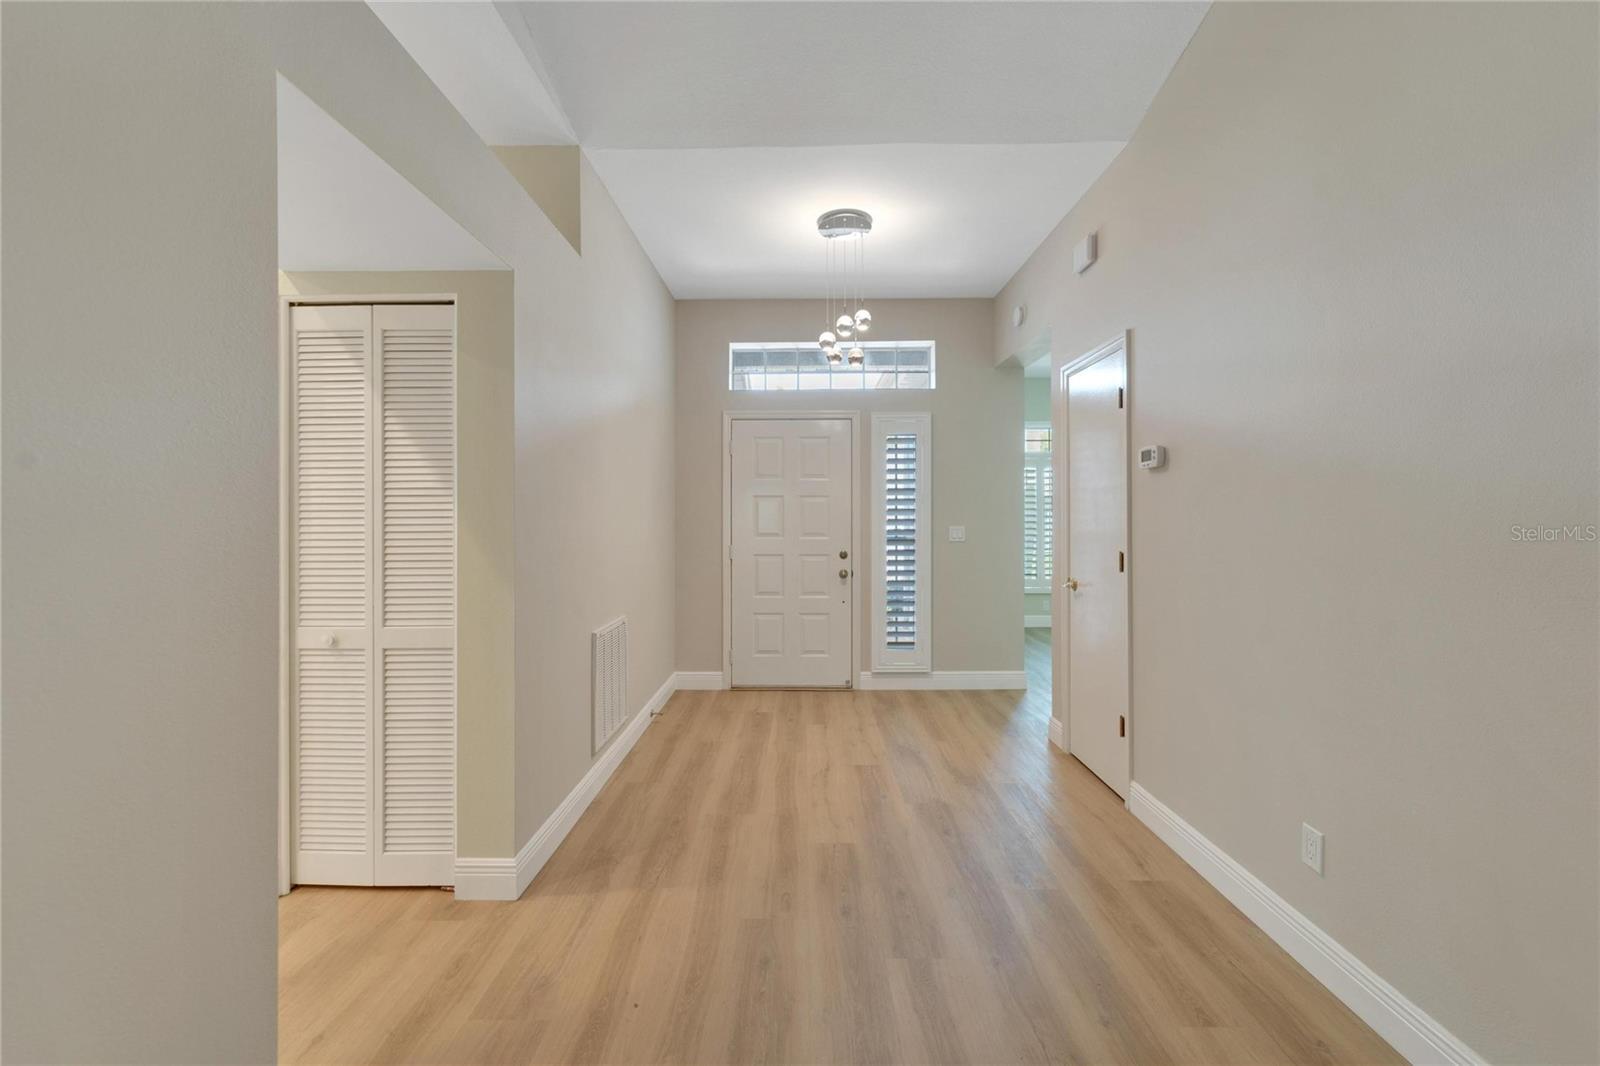 Foyer with LVP Flooring and spacious coat closet at entry